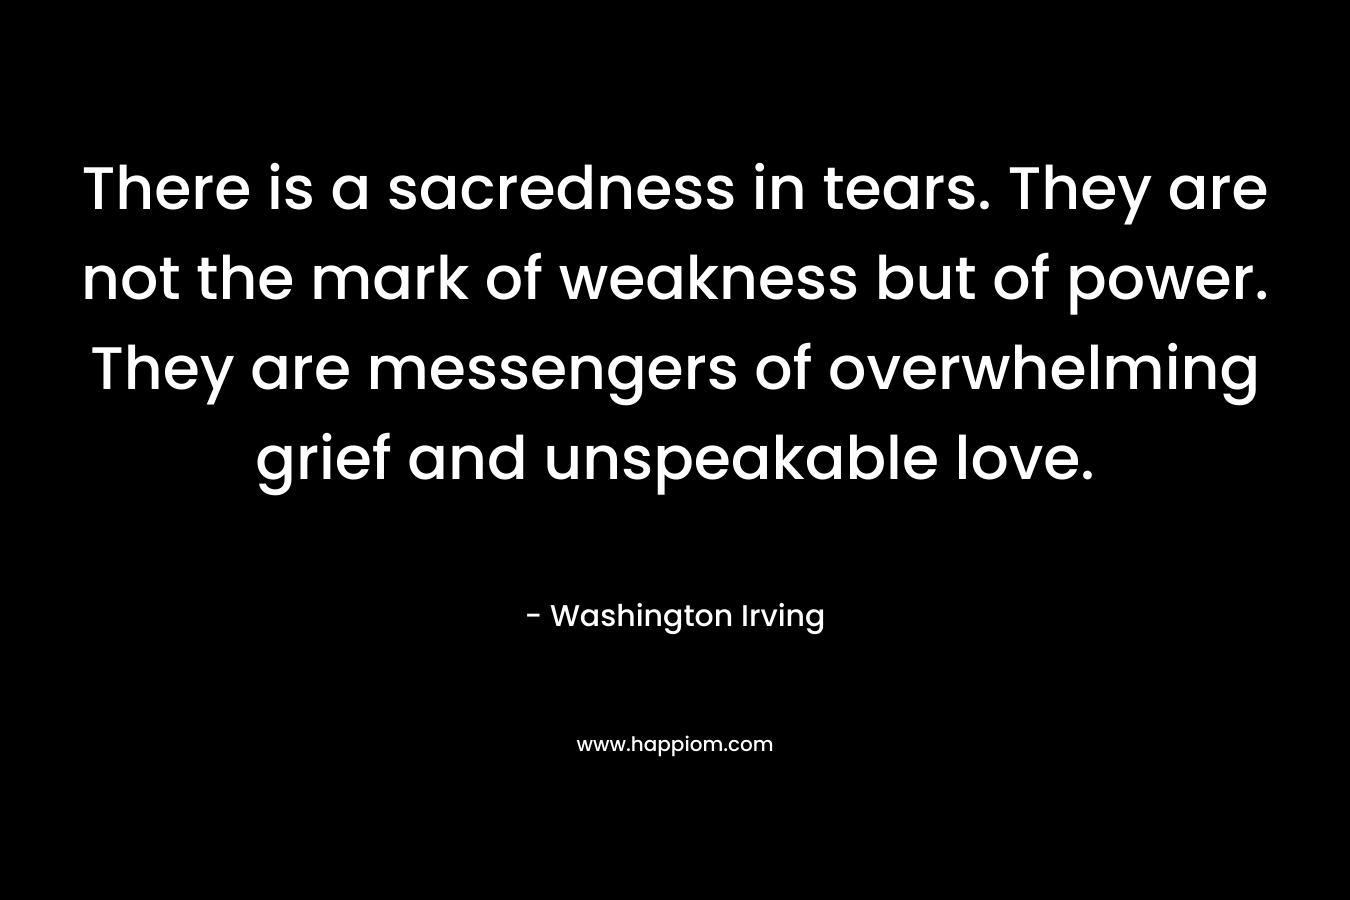 There is a sacredness in tears. They are not the mark of weakness but of power. They are messengers of overwhelming grief and unspeakable love.